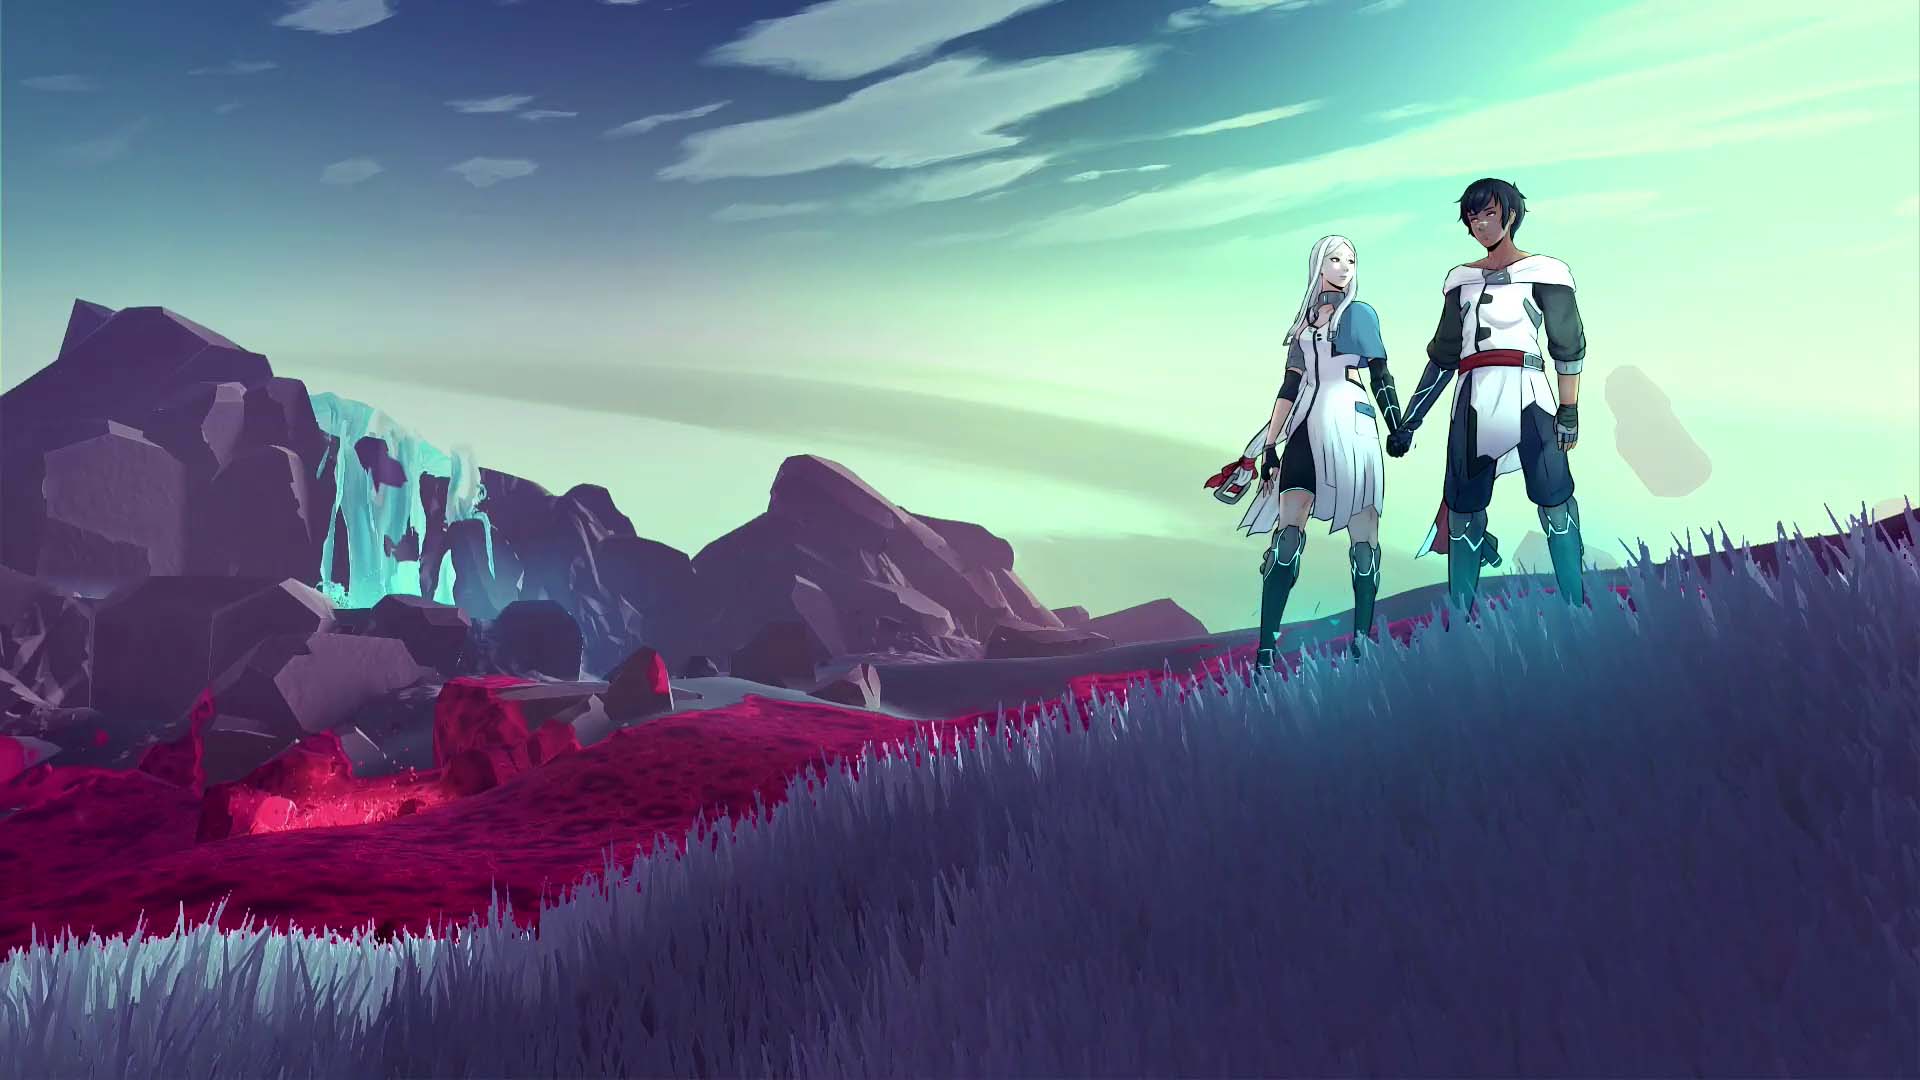 Furi Devs Announce New Adventure RPG “Haven” for PC and Consoles